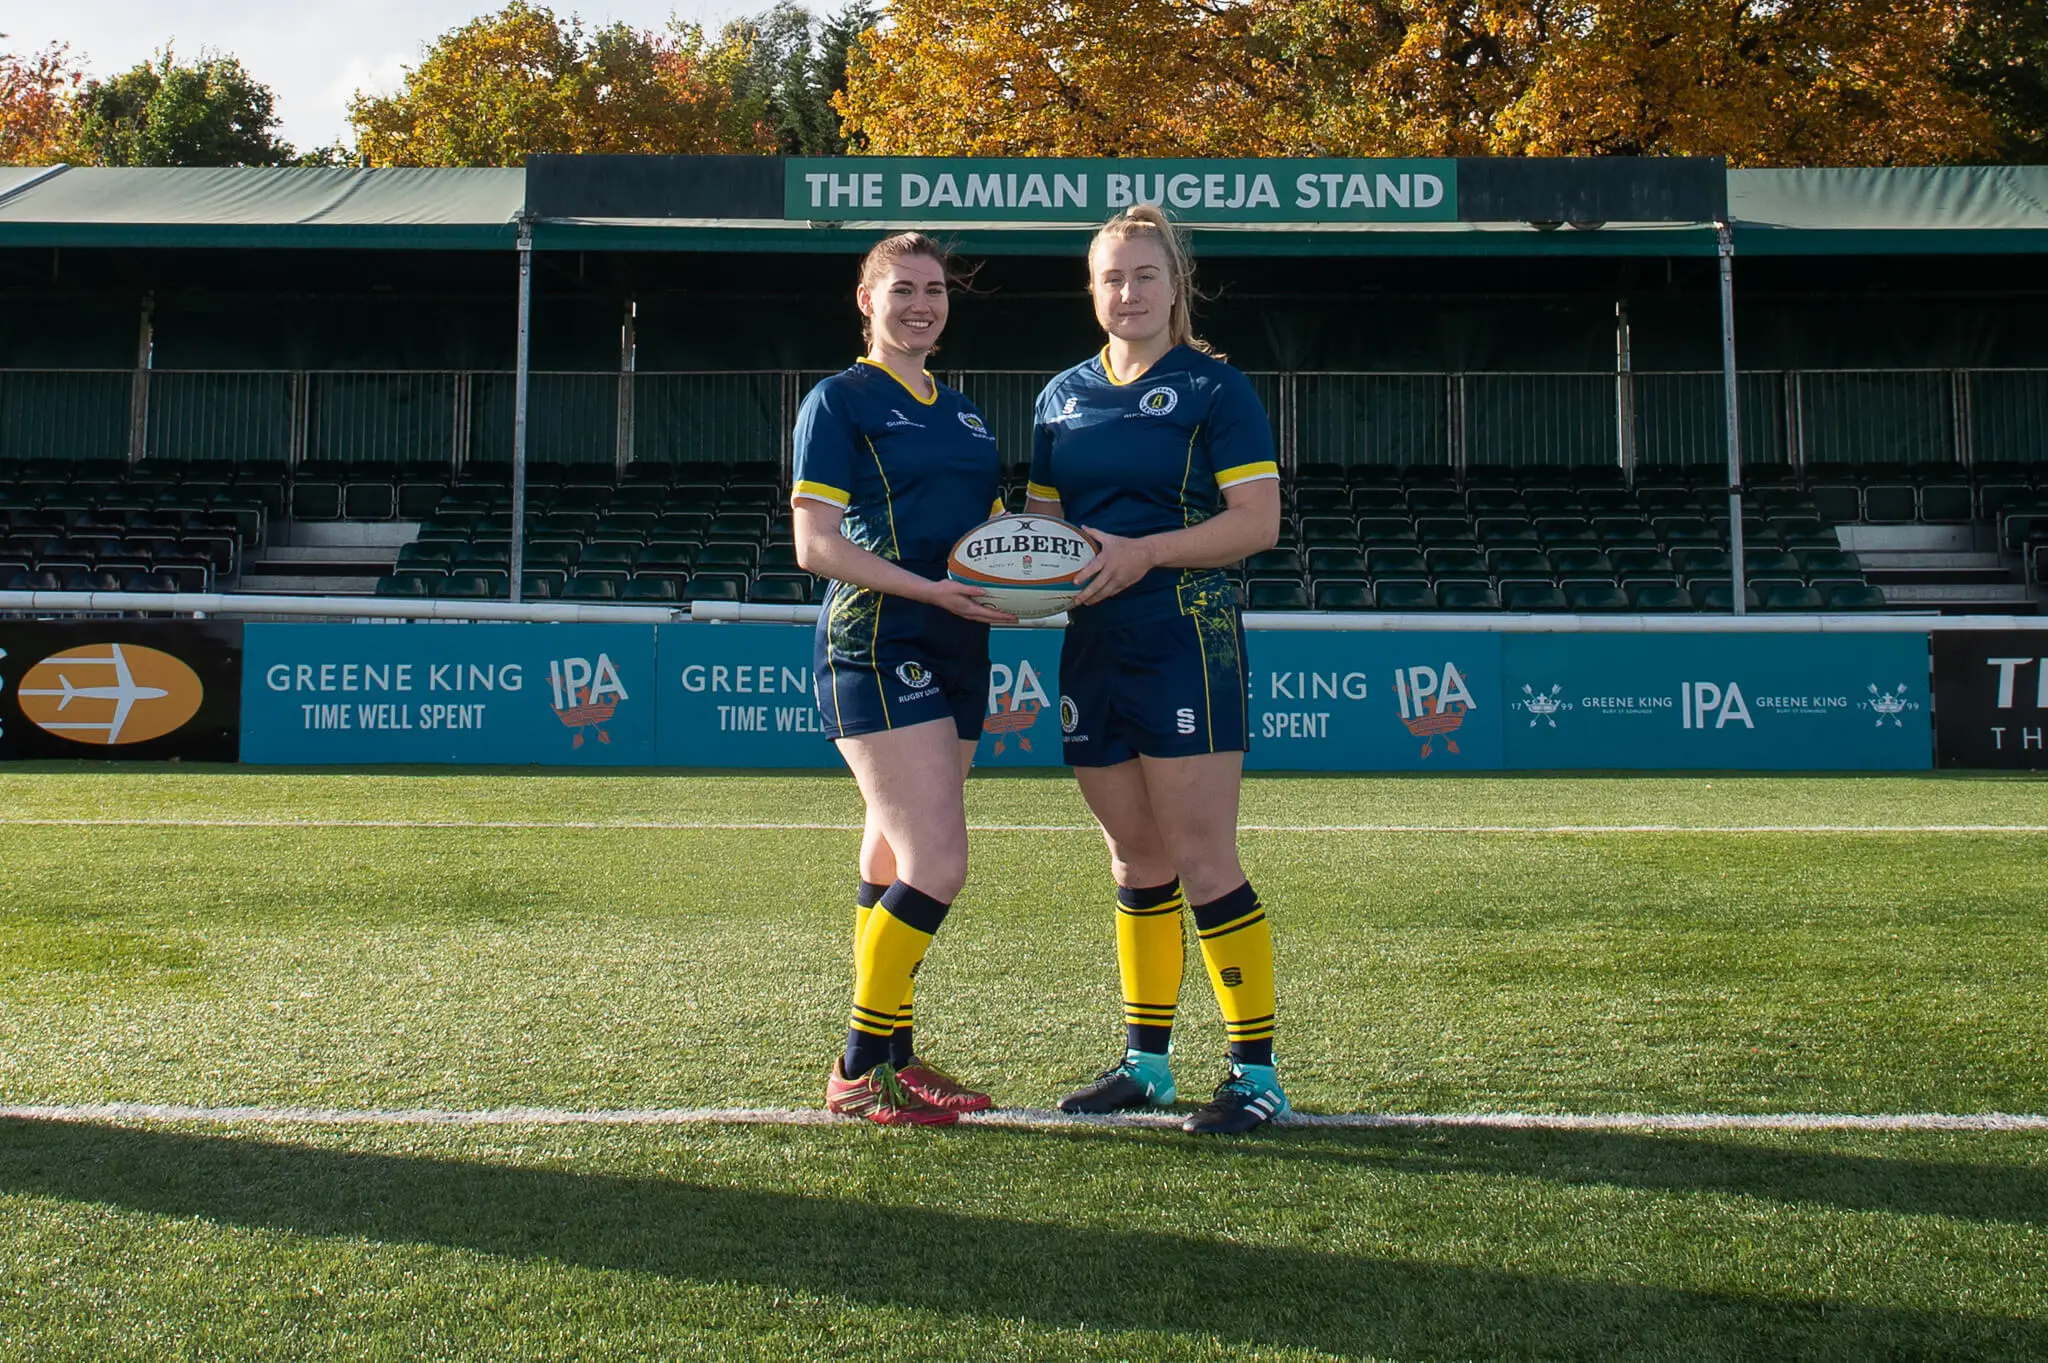 female Brunel rugby players in the Ealing Trailfinders rugby club